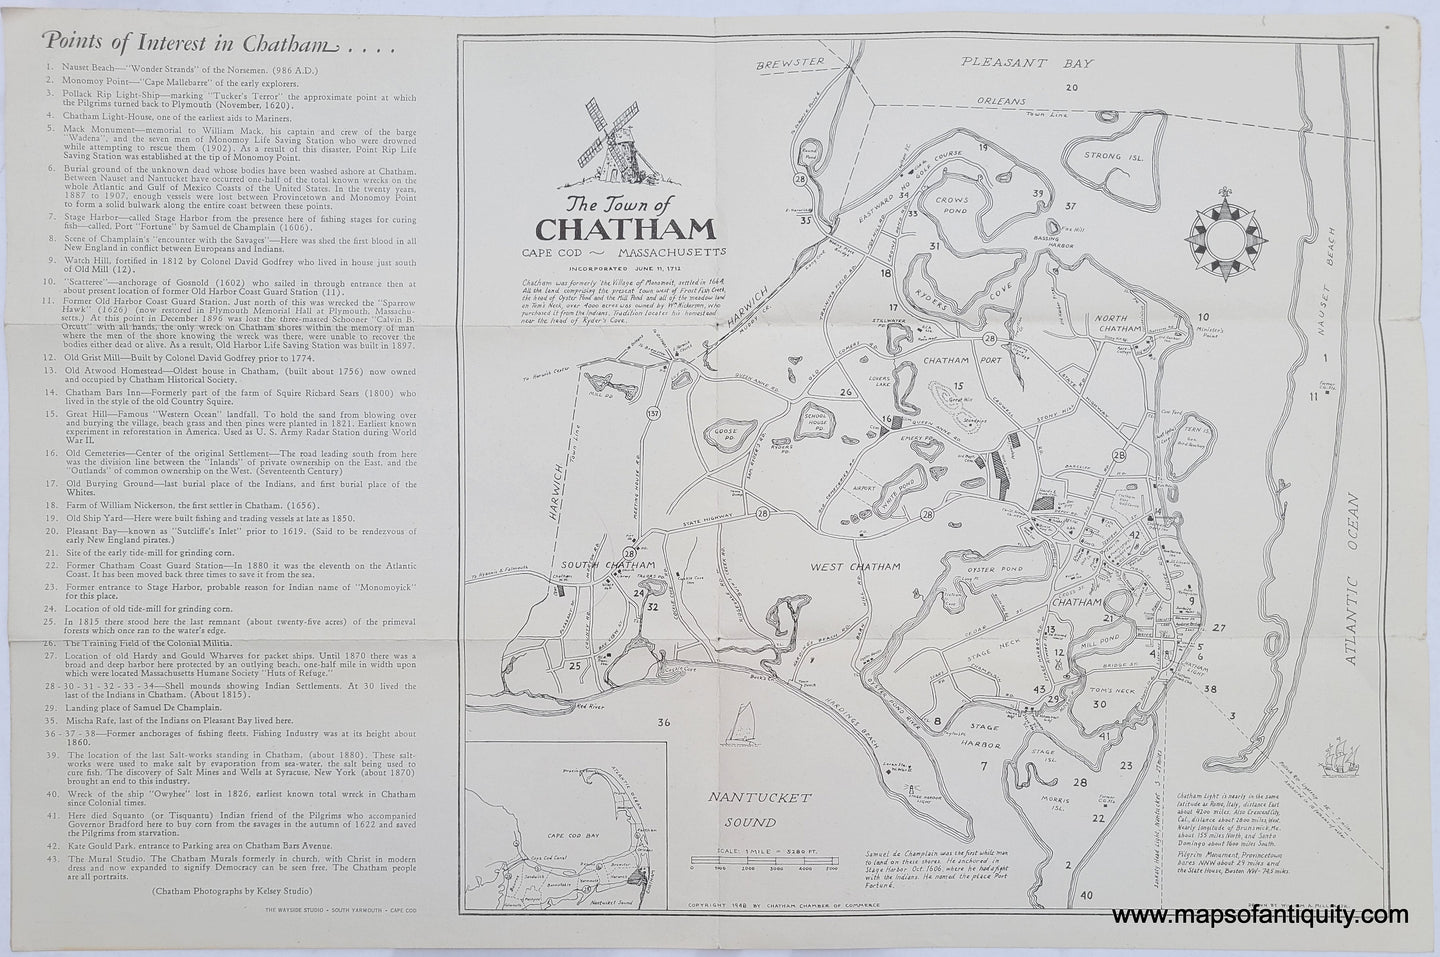 Antique-Map-The-Town-of-Chatham-Cape-Cod-Massachusetts-Incorporated-June-11-1712-US-Massachusetts-1948-William-Miller/Chatham-Chamber-of-Commerce-Maps-Of-Antiquity